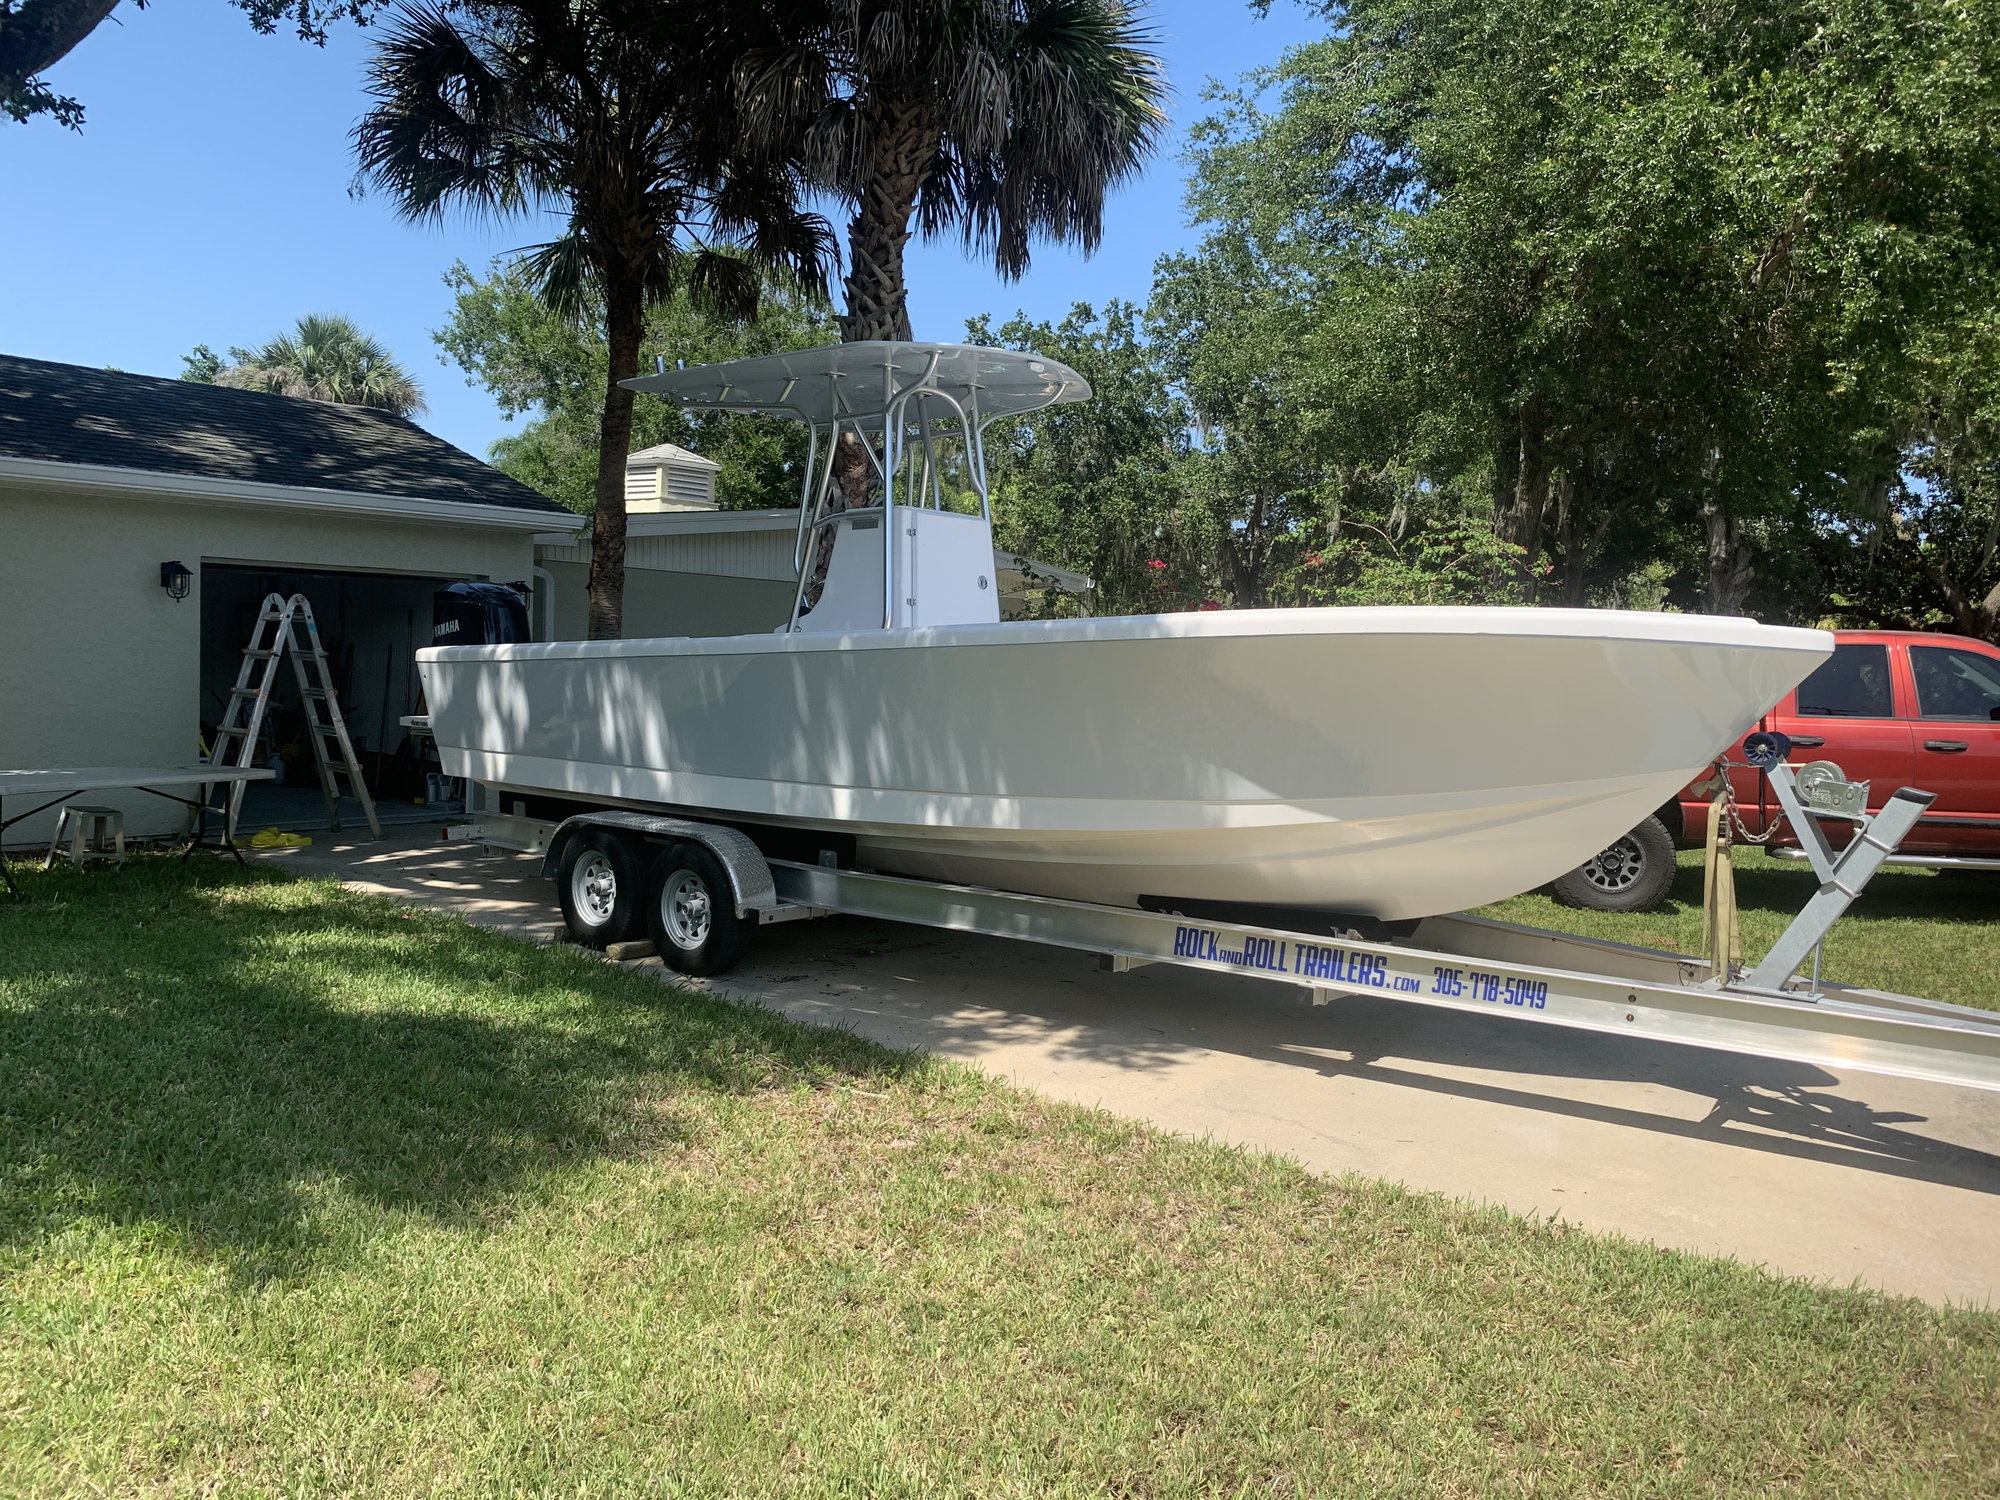 Boat windshield replacement in Miami? - The Hull Truth - Boating and  Fishing Forum